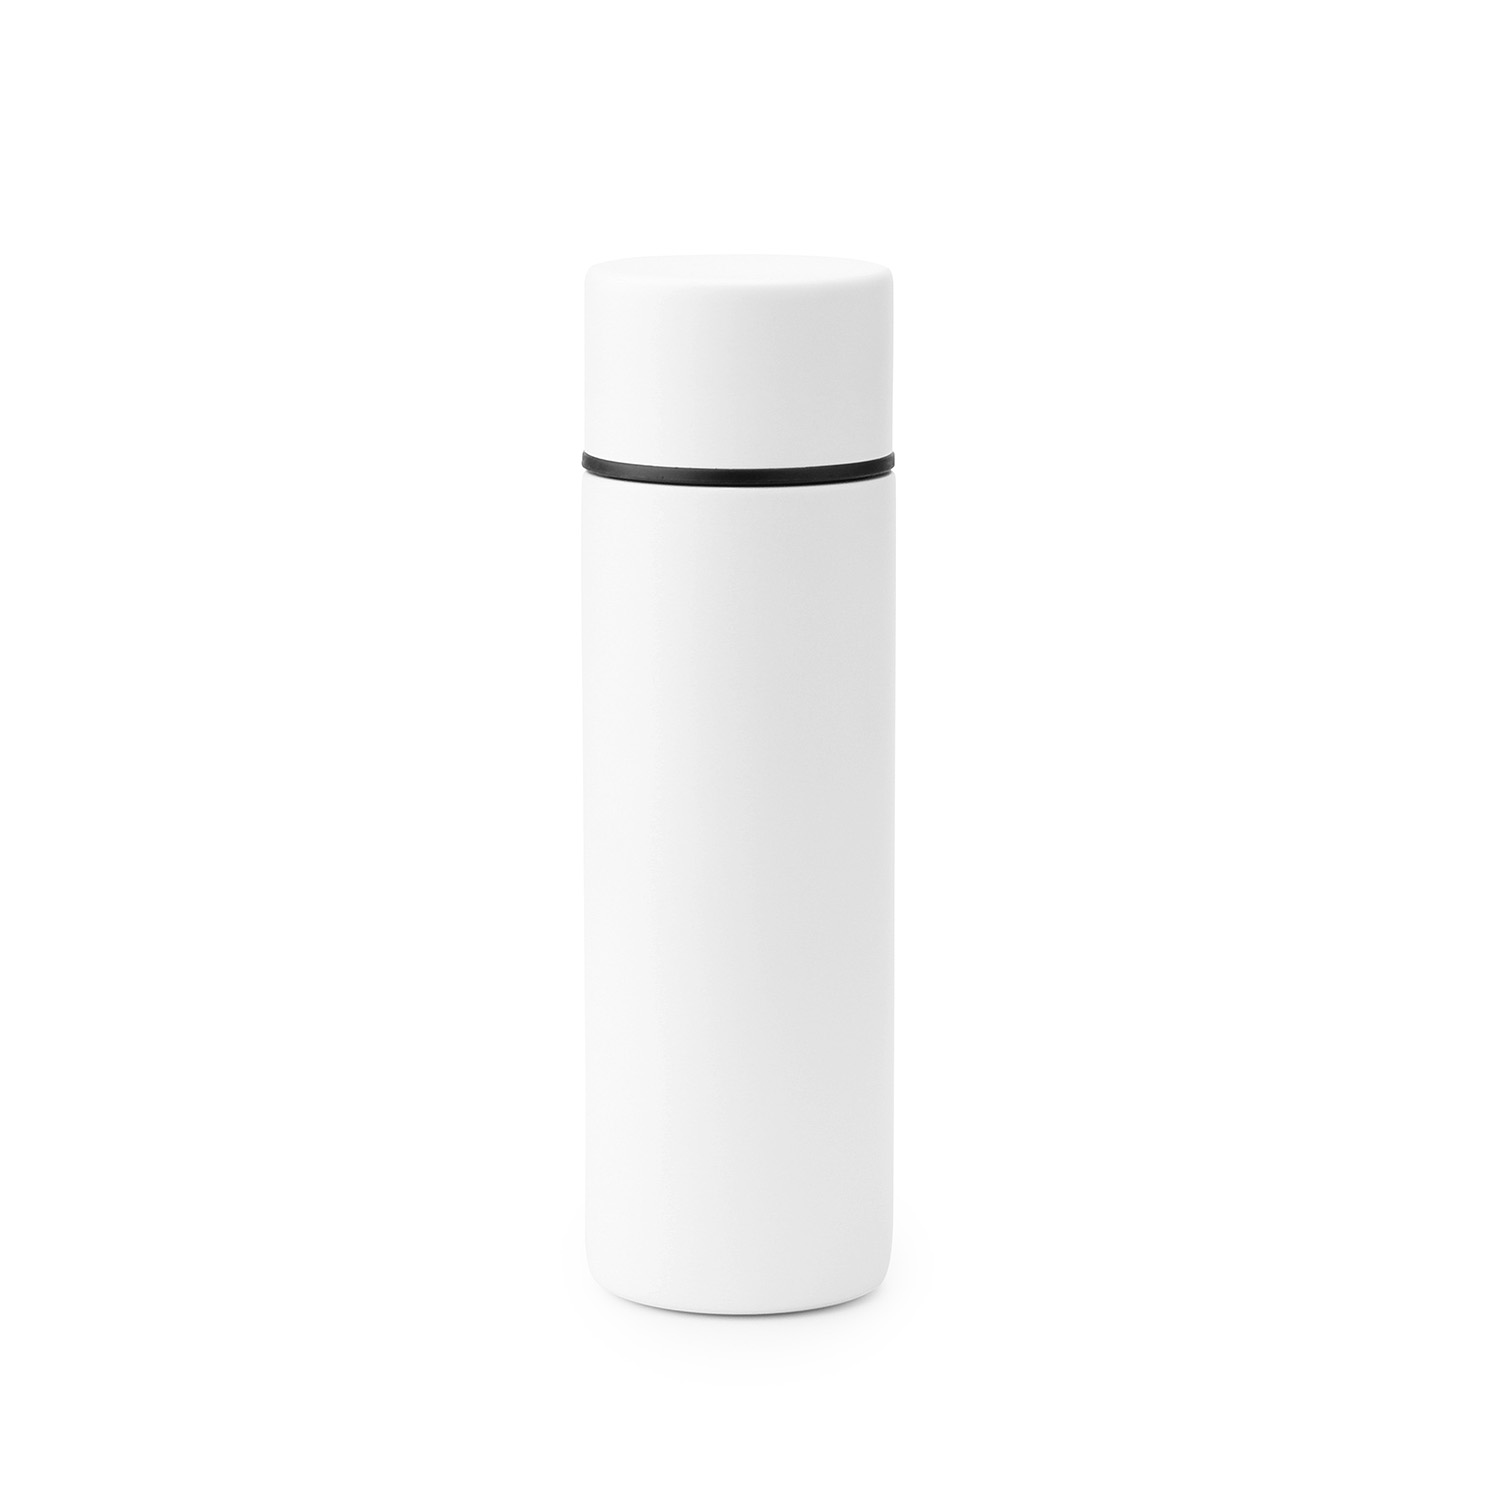 Thermos Water Bottle 